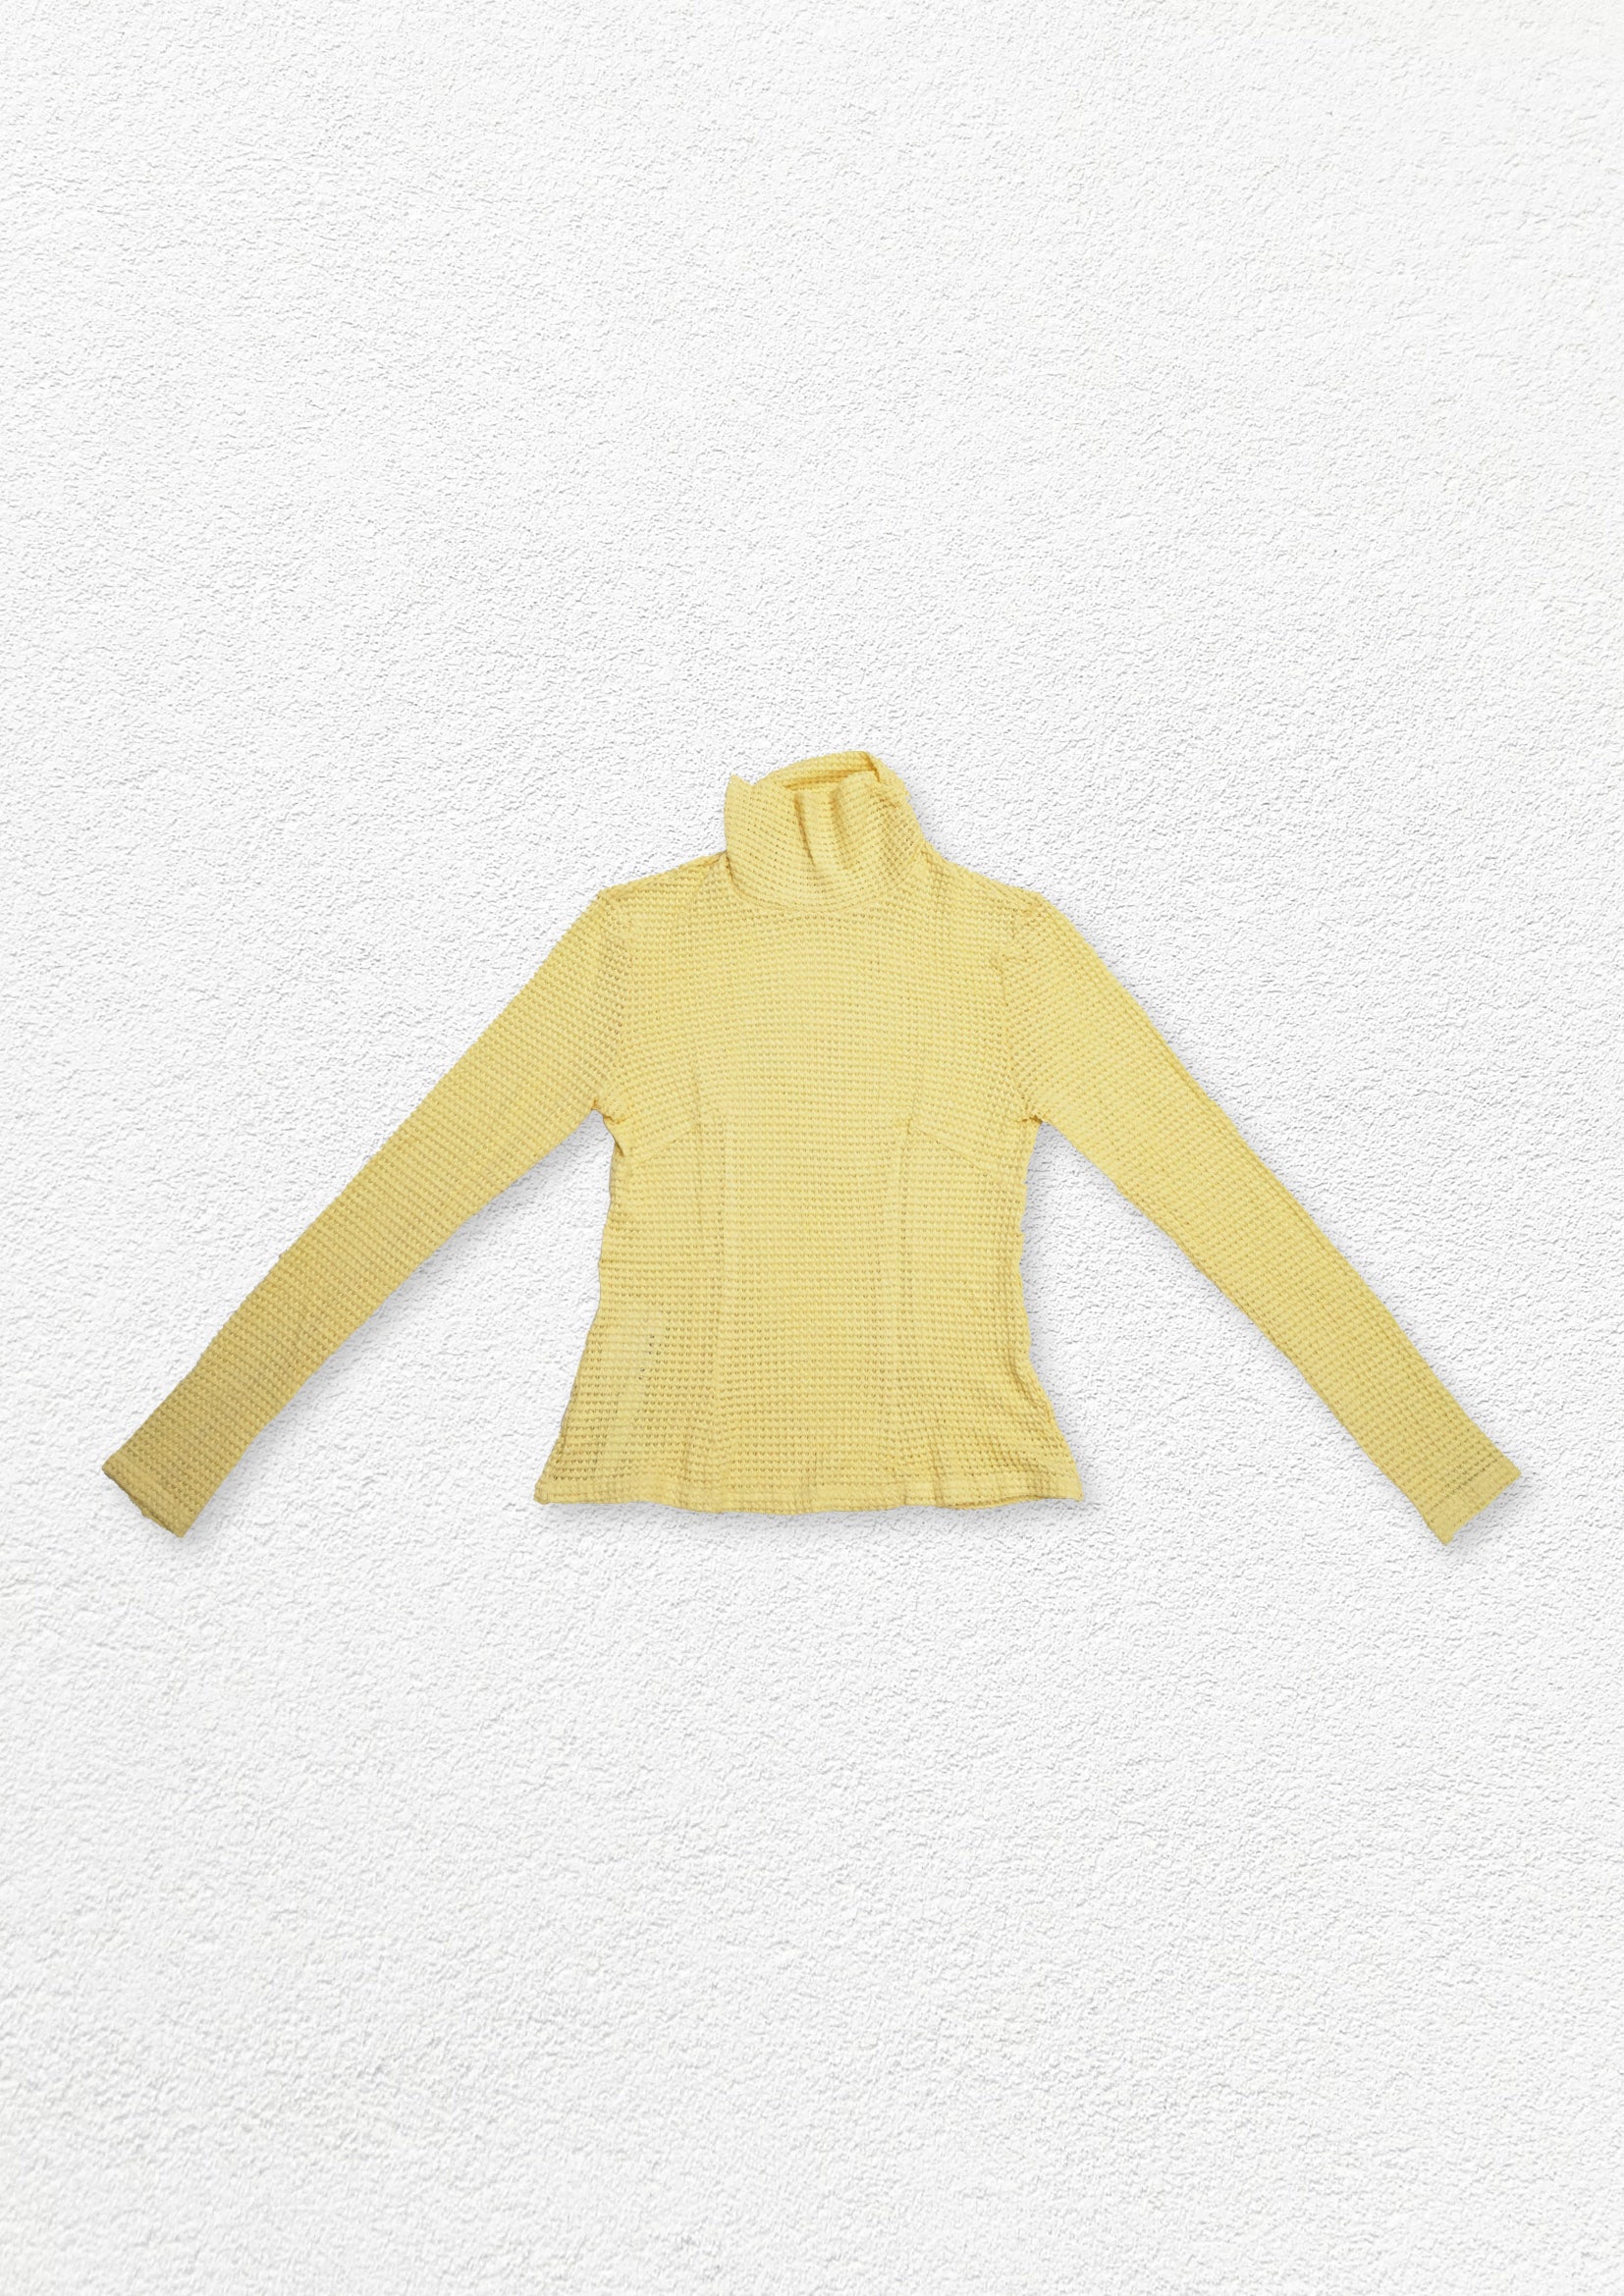 Turtleneck knit top in daisy yellow